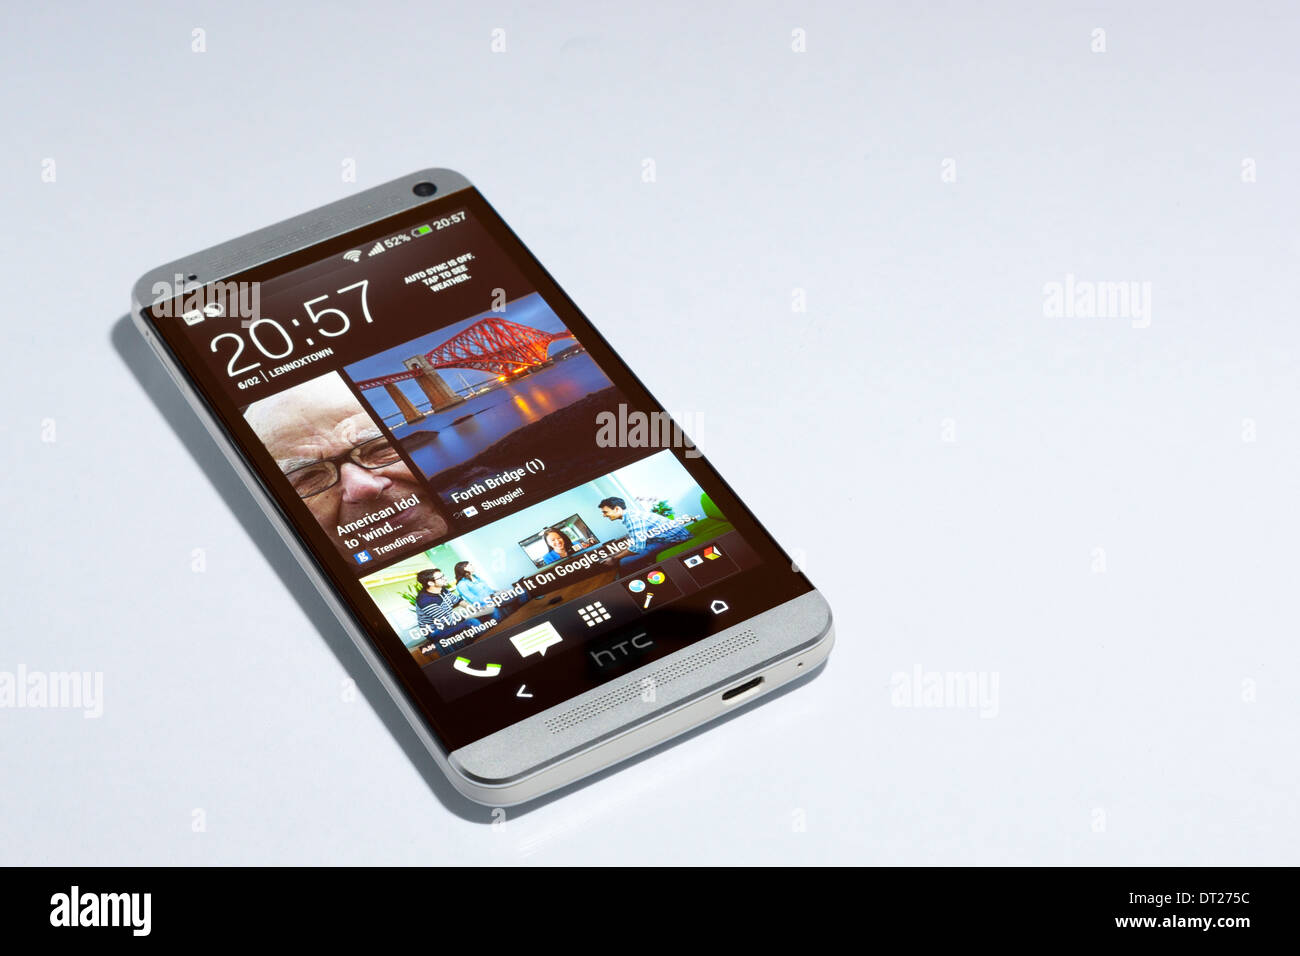 HTC One smartphone, silver, with Blinkfeed on the screen. White background. Stock Photo